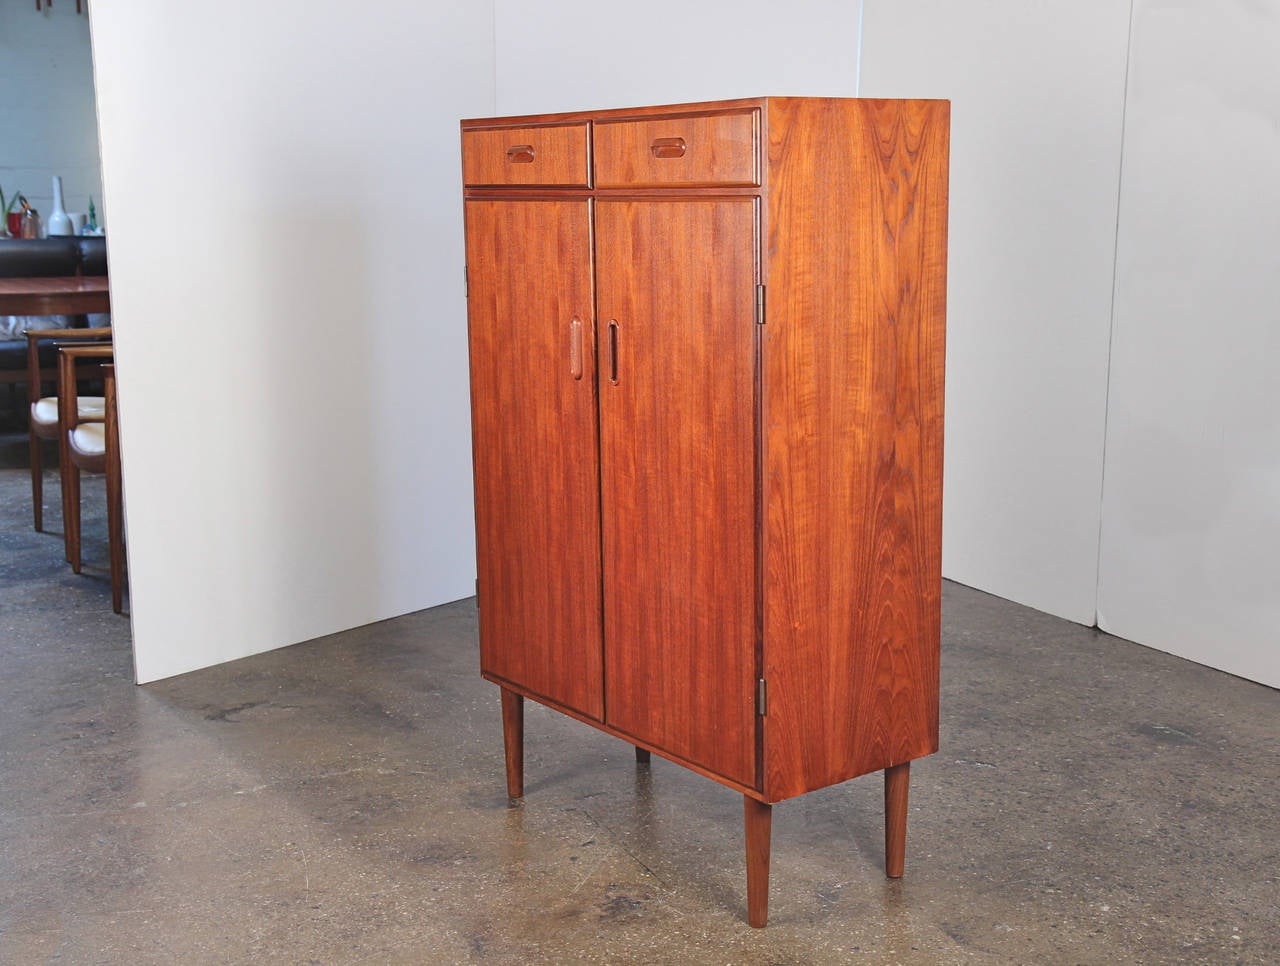 Smart storage. Danish modern tall chest, dressing cabinet, or armoire has two shallow drawers up top and four spacious shelves below. Perfect for the bedroom, living room, or even the kitchen or dining room. Teak shows beautiful tone and grain.